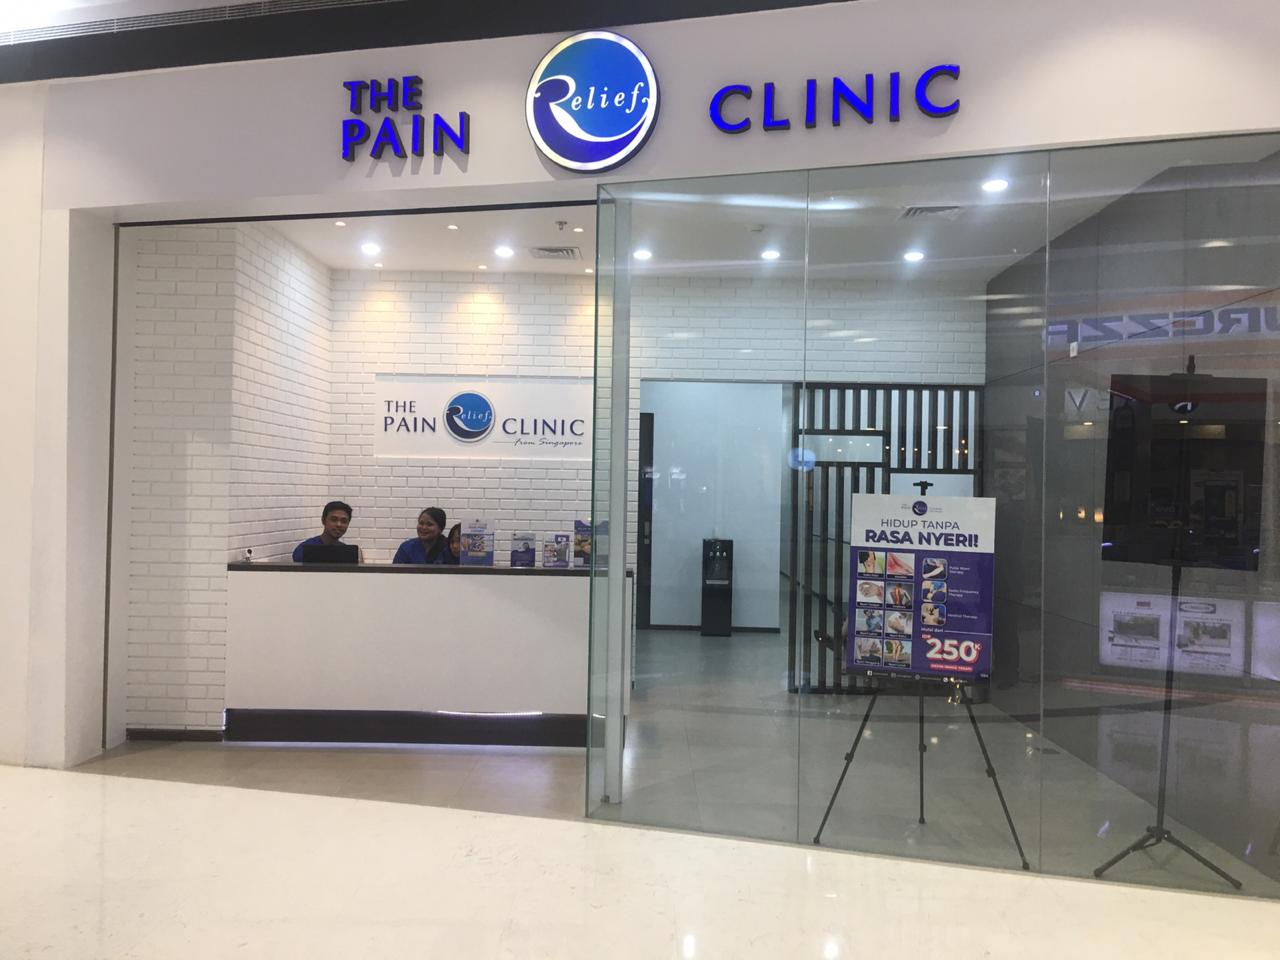 The Pain Relief Clinic shop front in lippo mall puri st. moritz